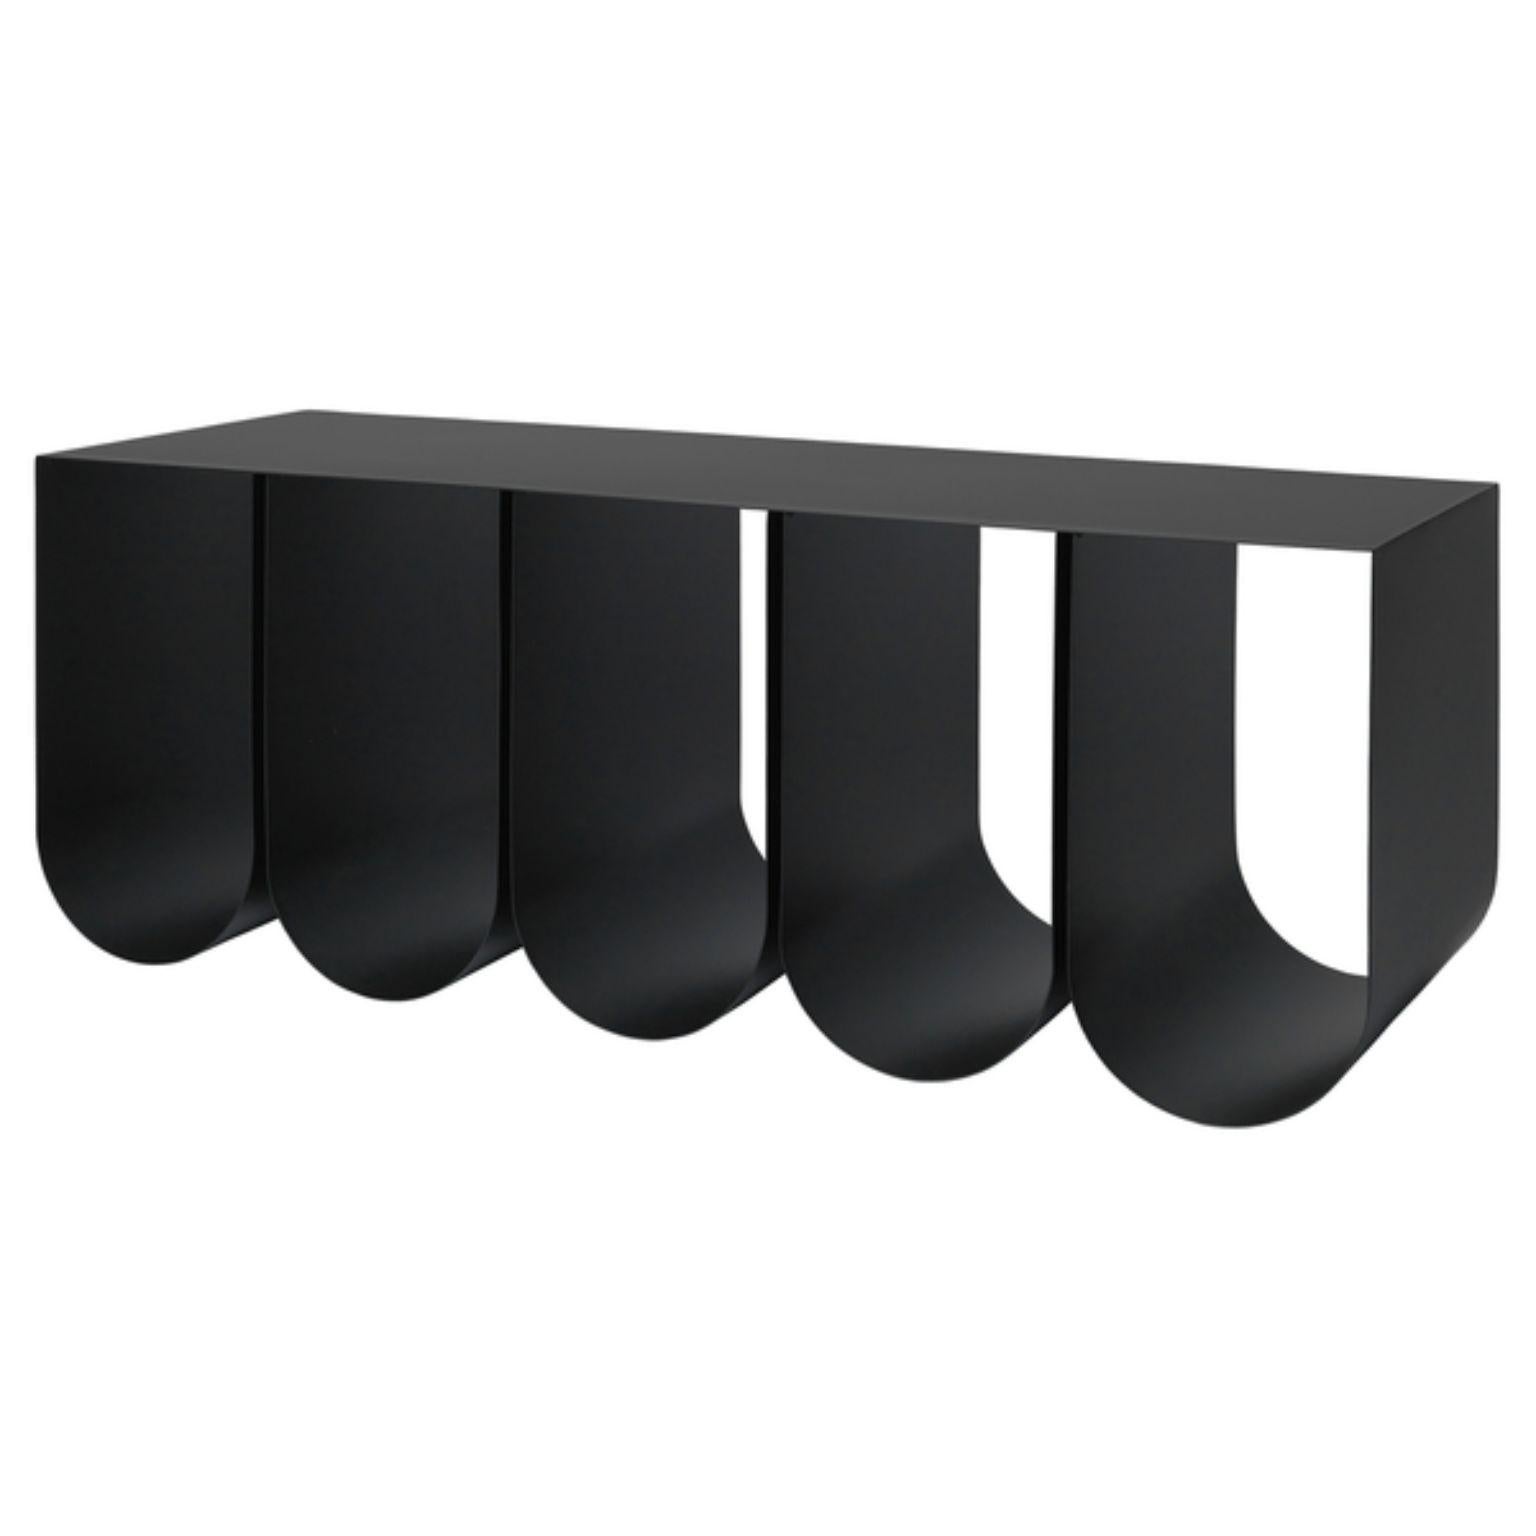 Black steel curved bench by Kristina Dam Studio.
Materials: black powder-coated steel
Dimensions: D 40 x W 110 x H 42 cm
35 kg

Dimensions cannot be customized.

*Safe to use outdoor.

Kristina Dam graduated from The Royal Danish School of